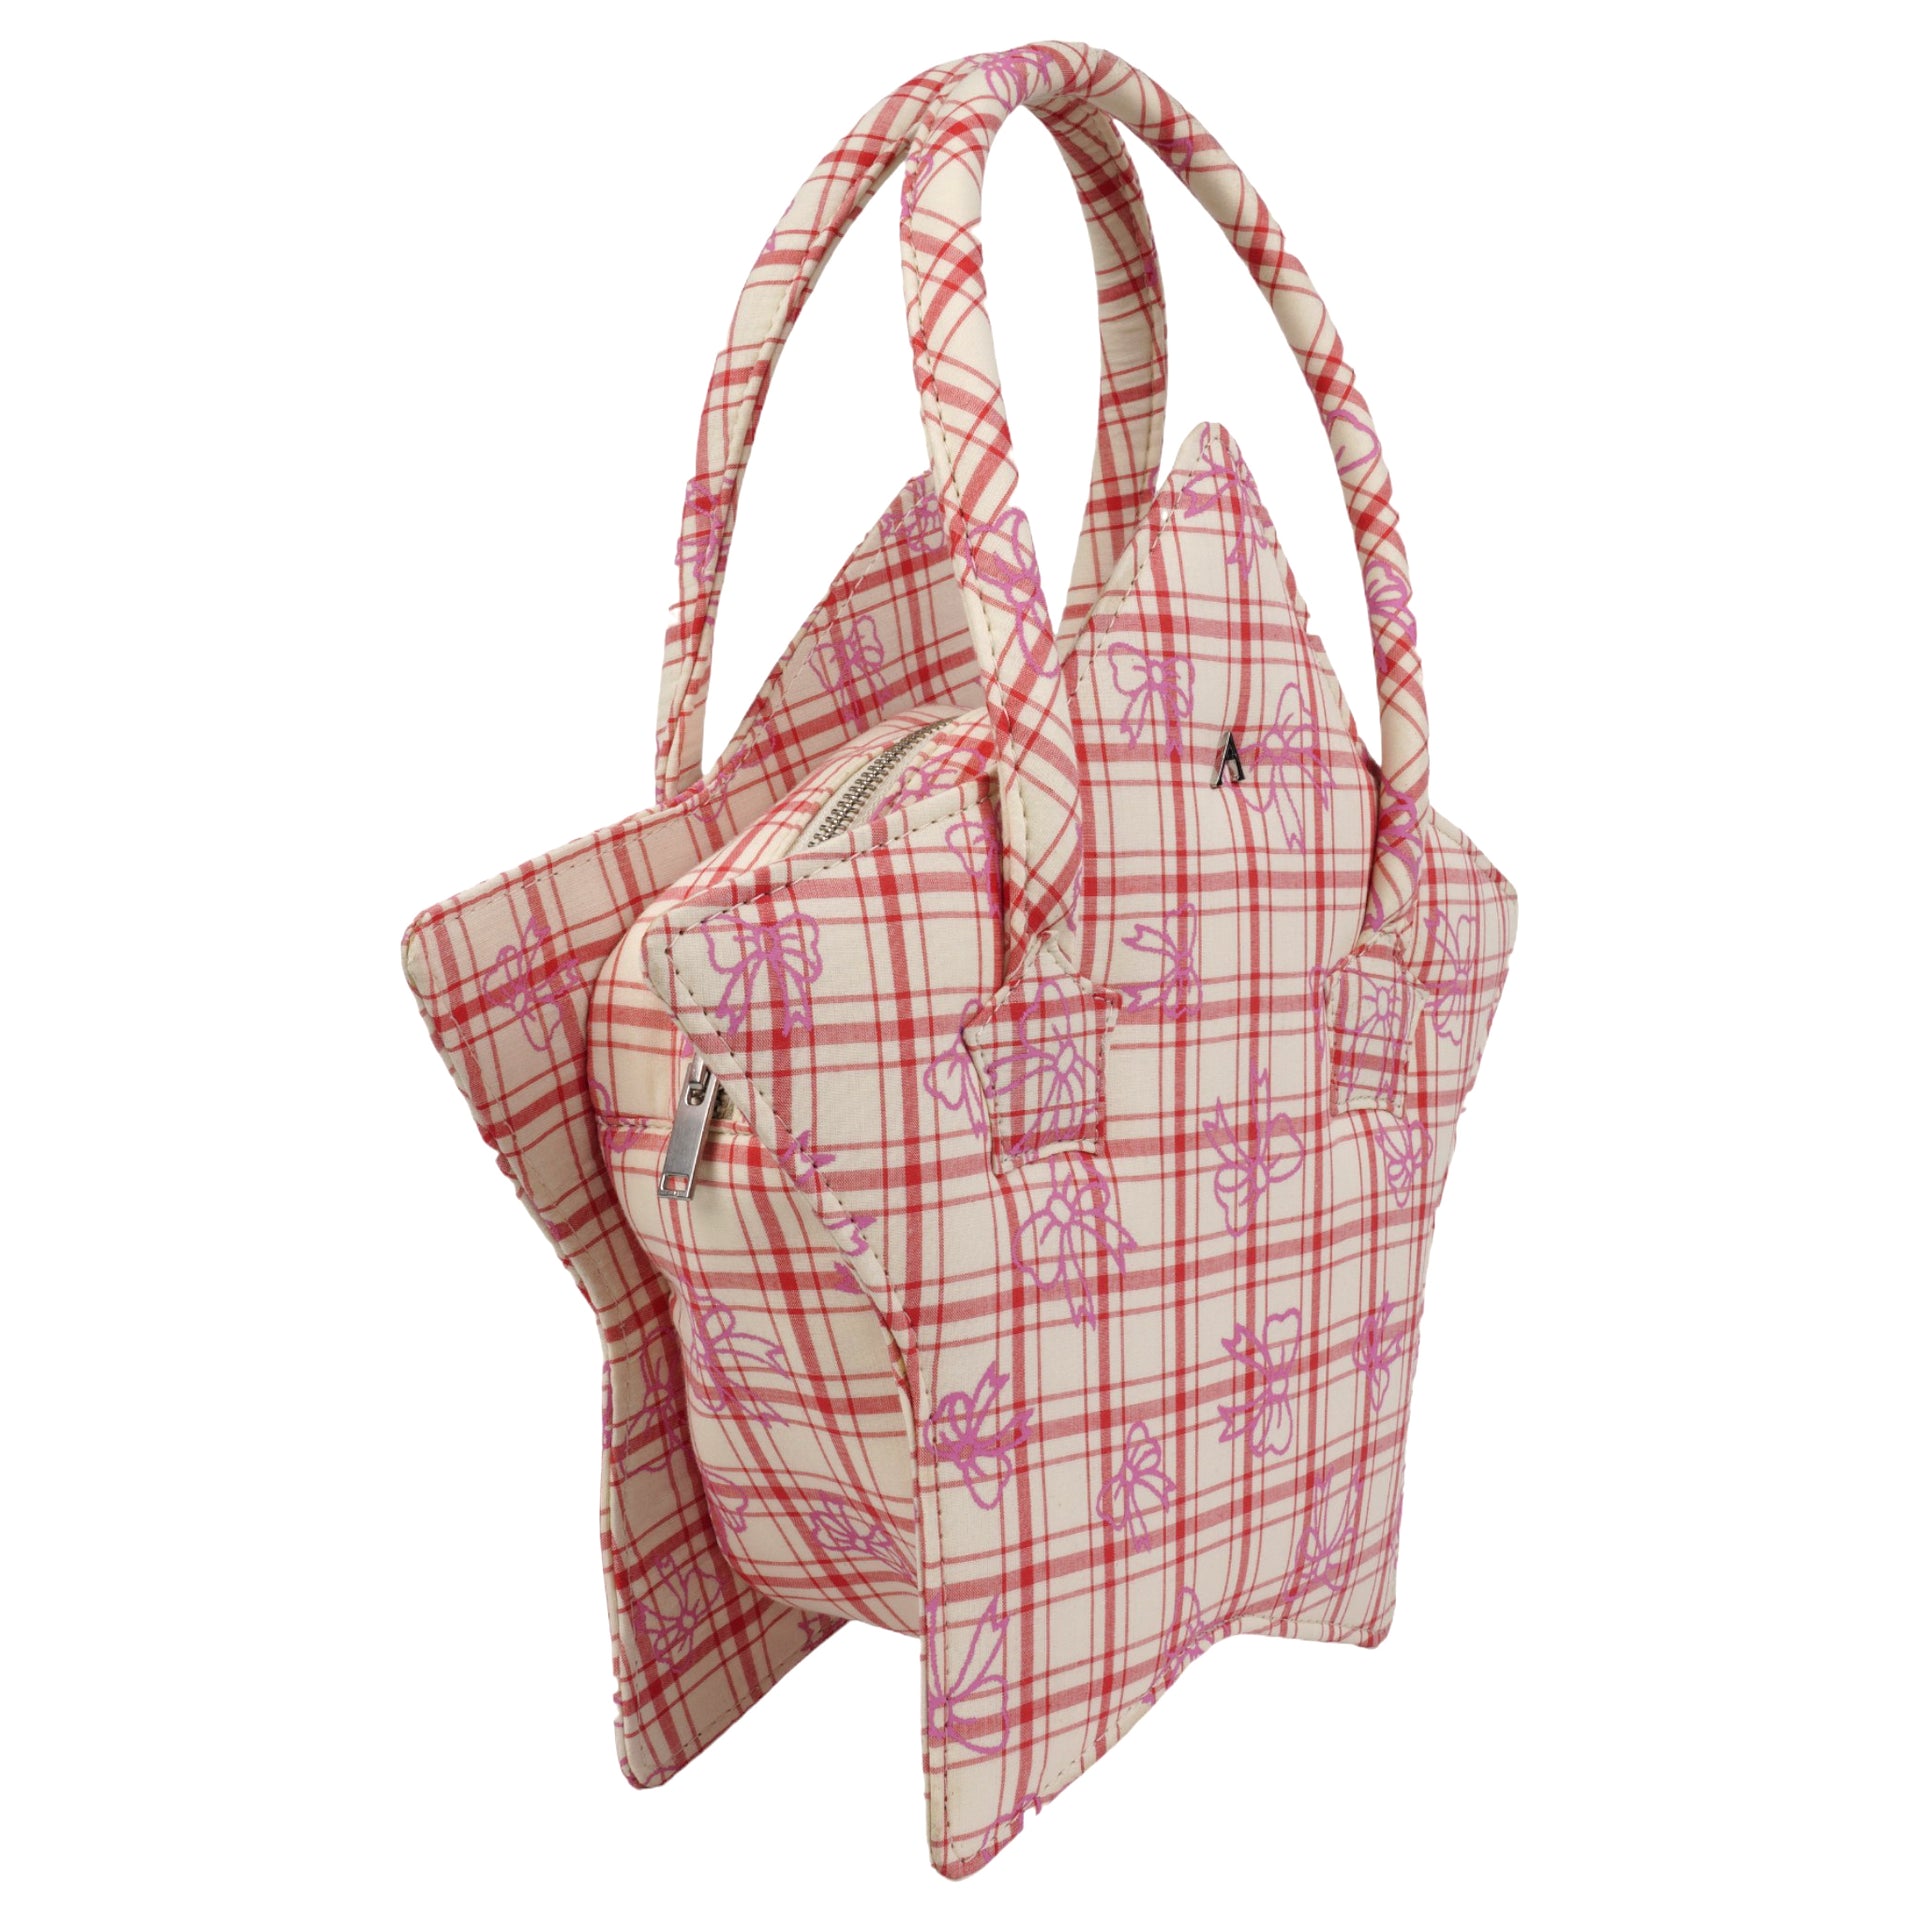 STAR BAG / RED CHECK W. BOWS